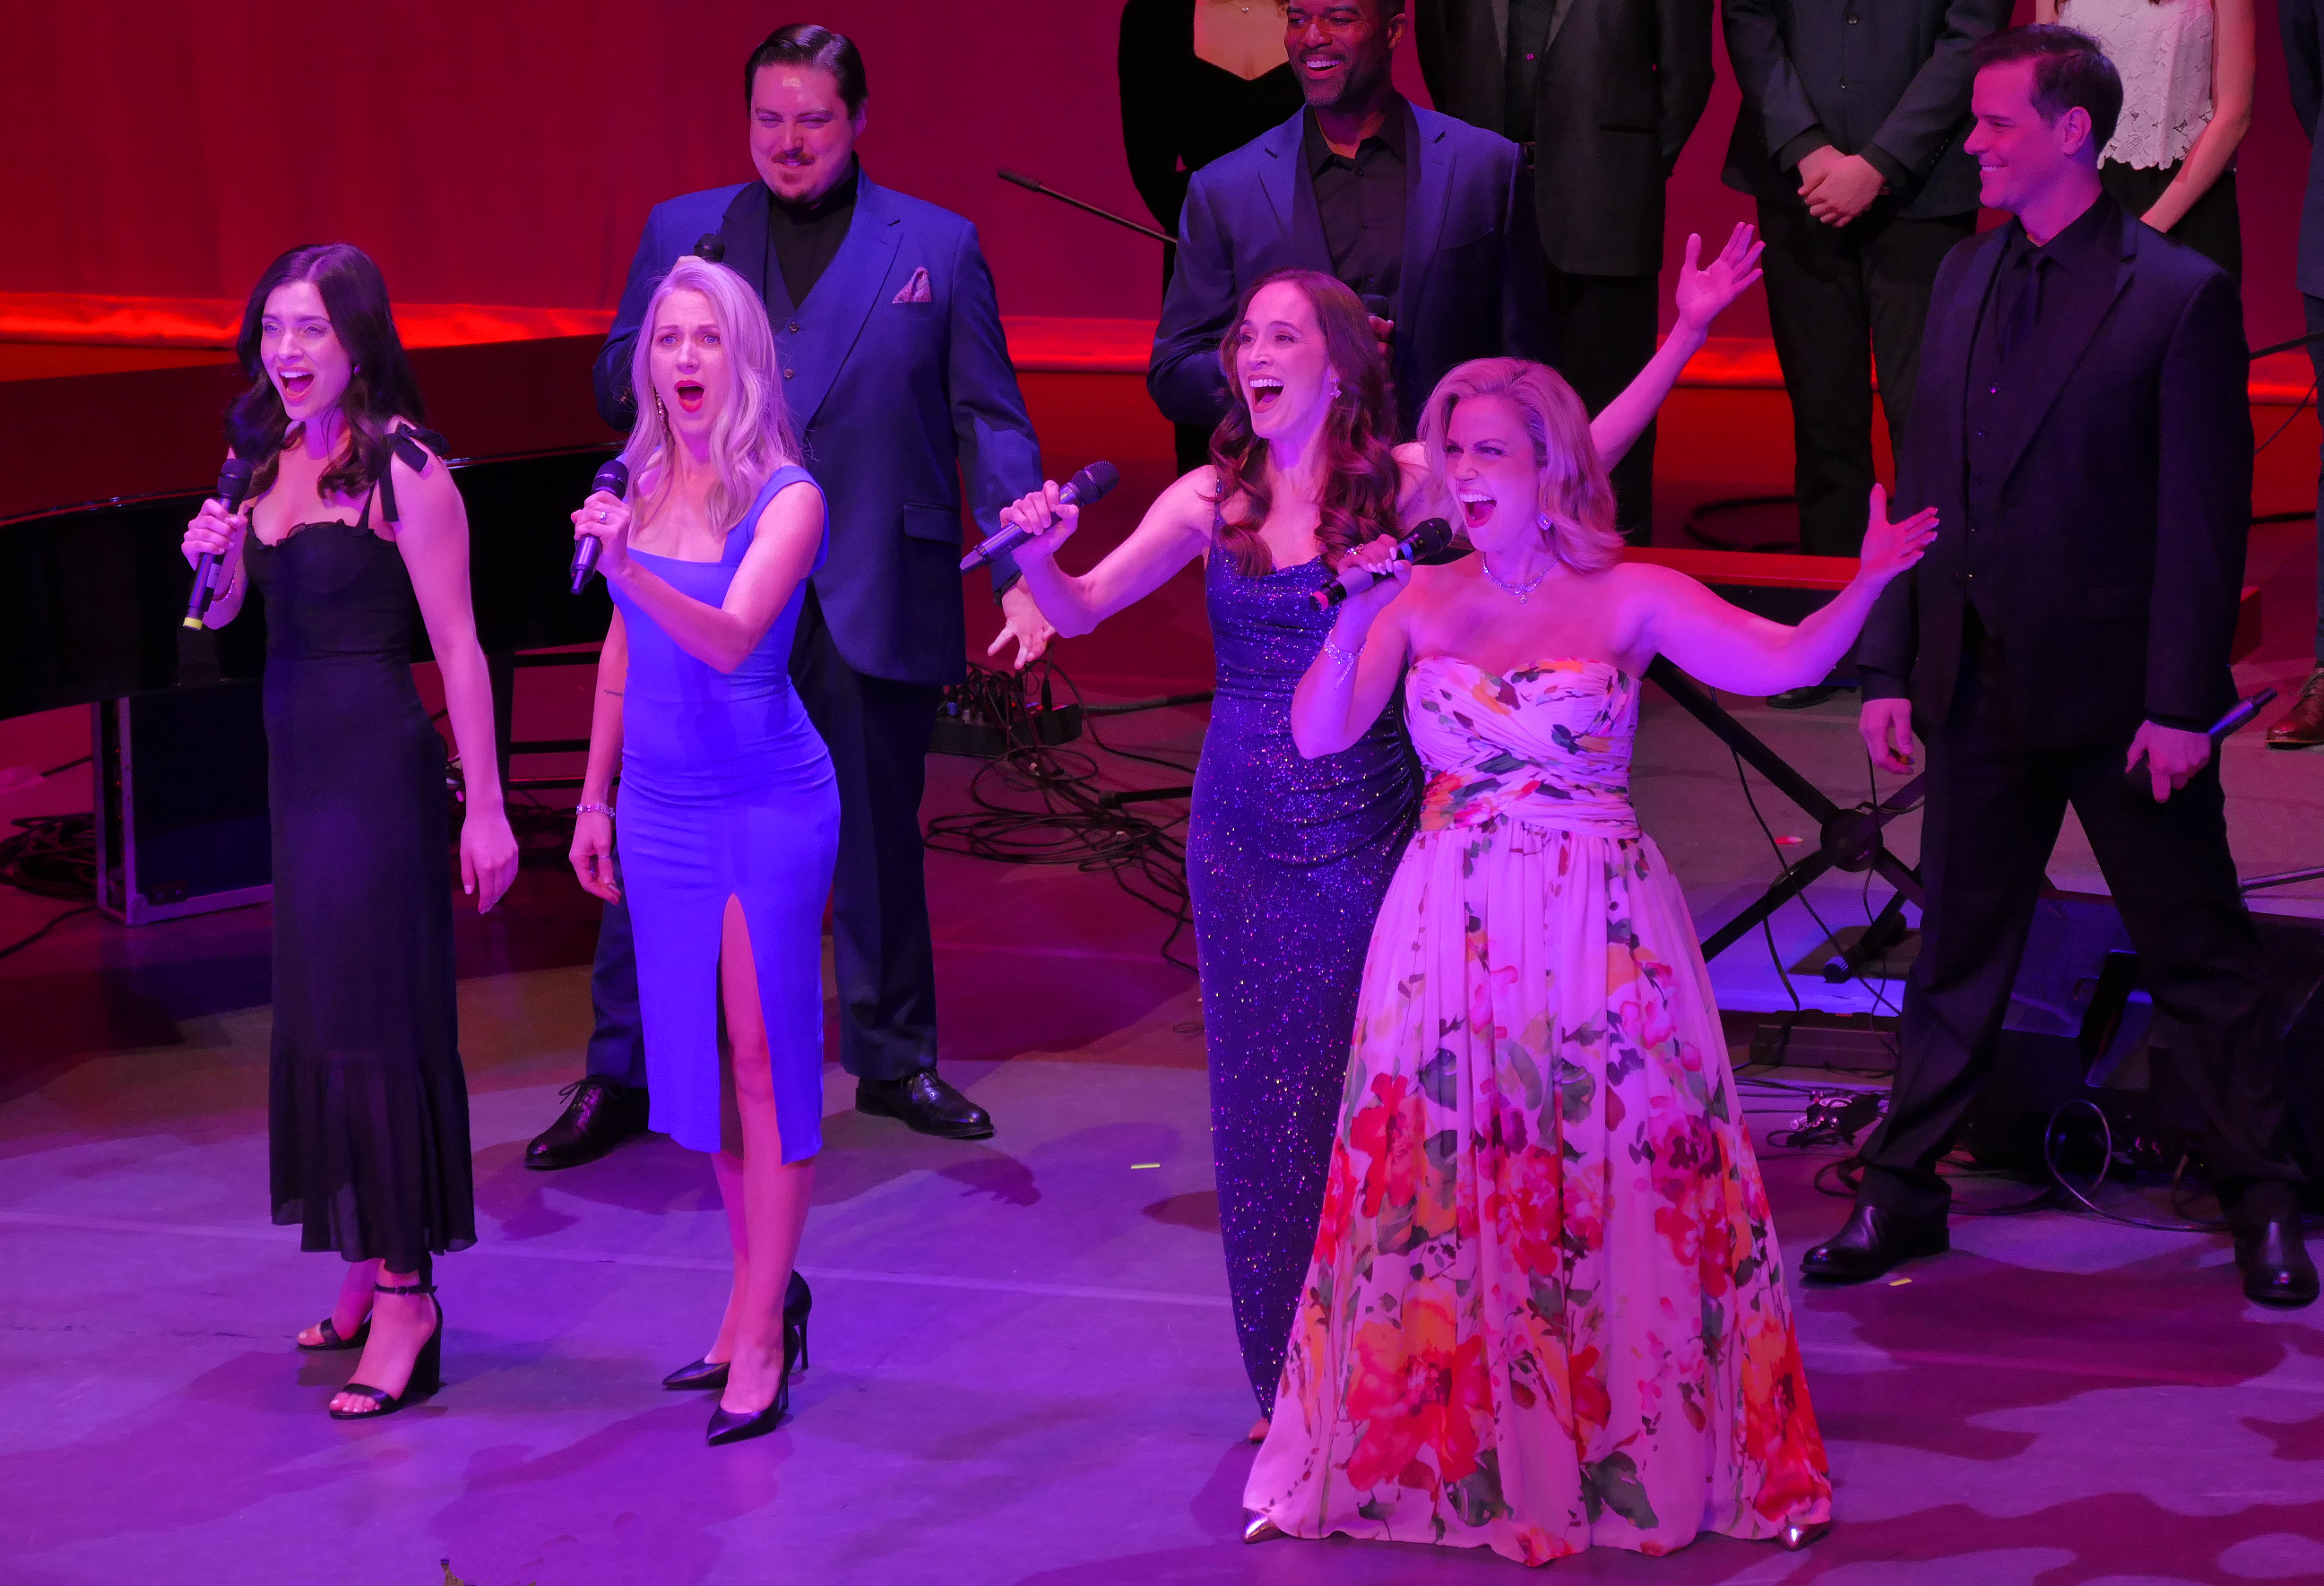 Rvc Ctr Molloy College l to R Julia Udine Sara Jean Ford Elizabeth Welch Raquel Suarez Groen of Phantom of the Opera fame sing together 4522 Joe Abate